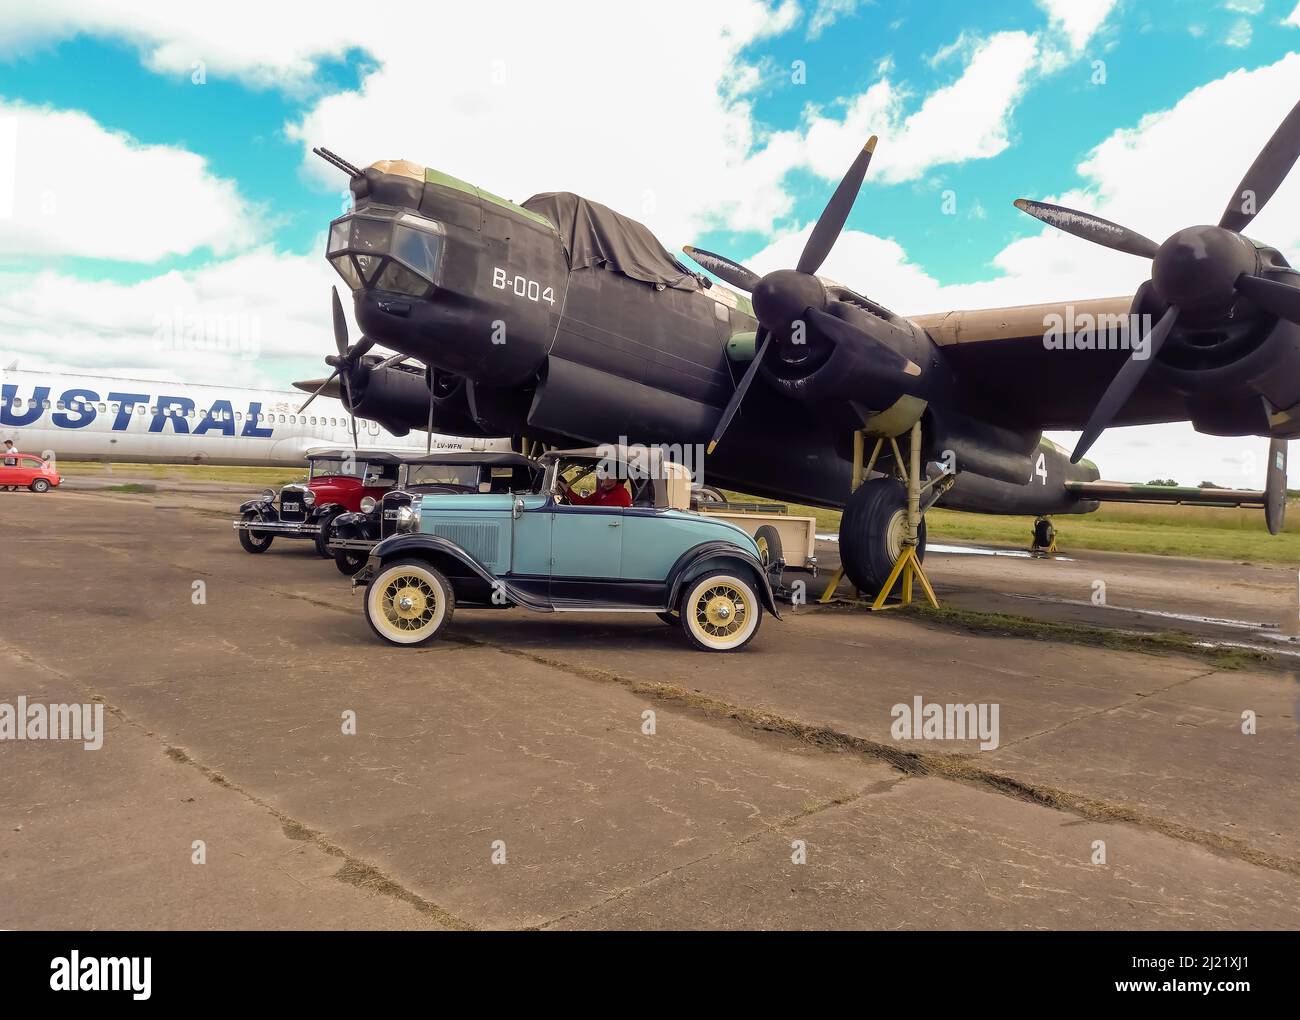 Old cyan Ford Model A coupe roadster circa 1930 parked in front of a WWII Avro Lincoln MKII four-engined bomber 1944-1967. Classic car show. Copyspace Stock Photo